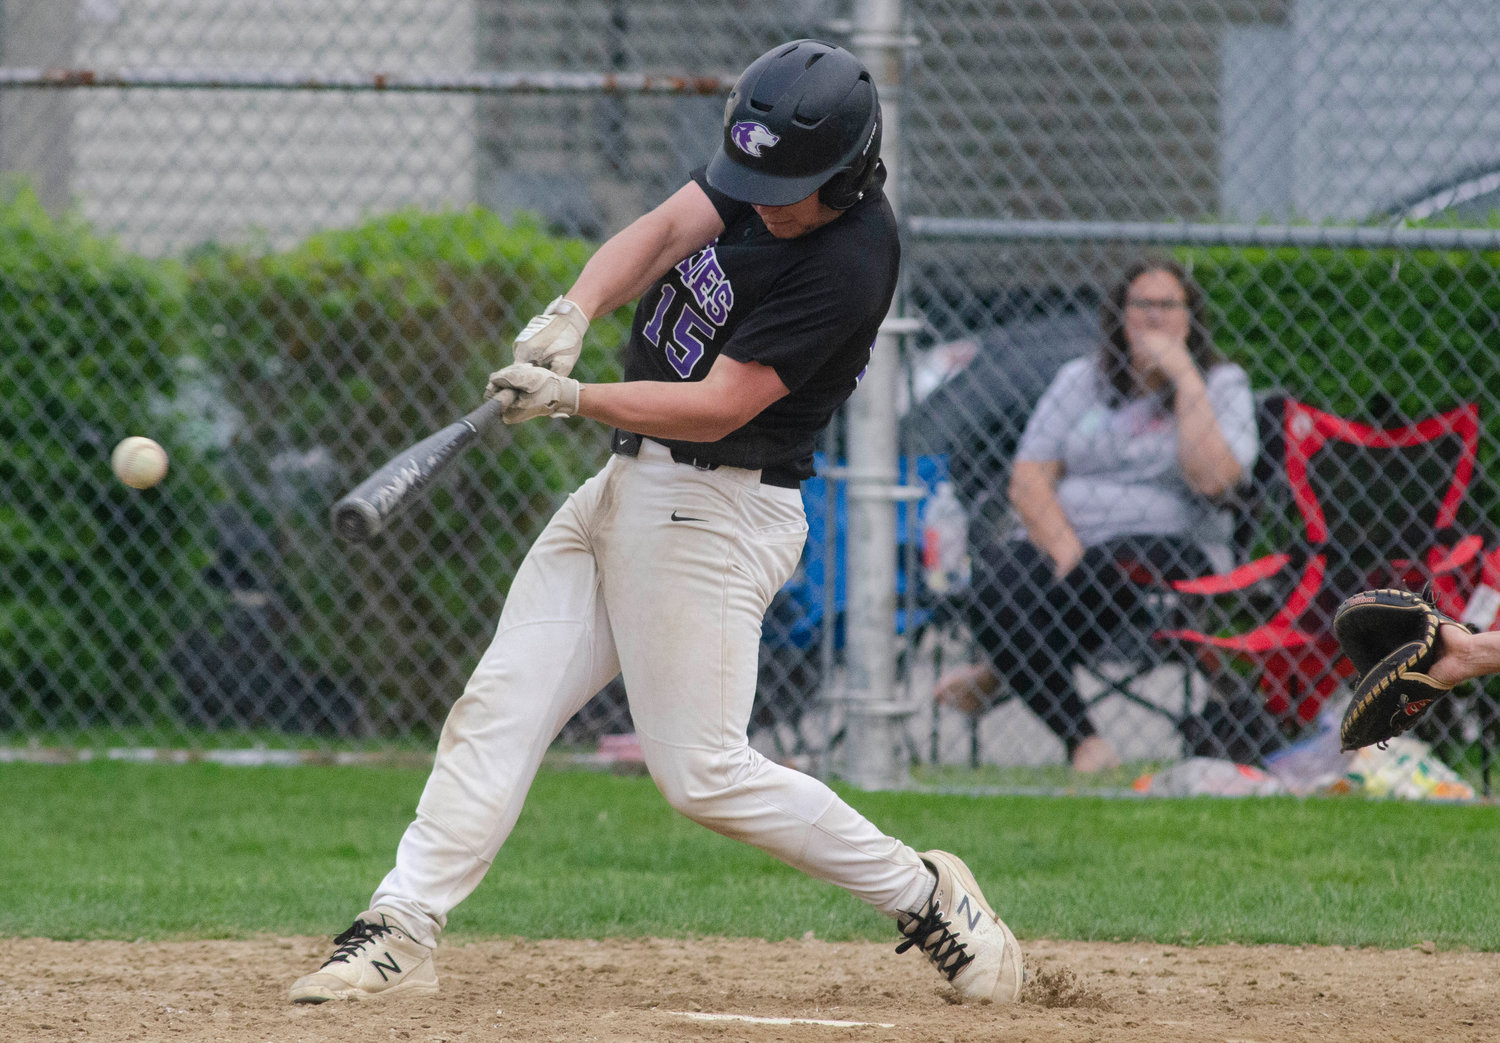 Senior catcher Jack Standish smacks one of his three hits during the game. Standish went three for four and drove in two runs for the Huskies.